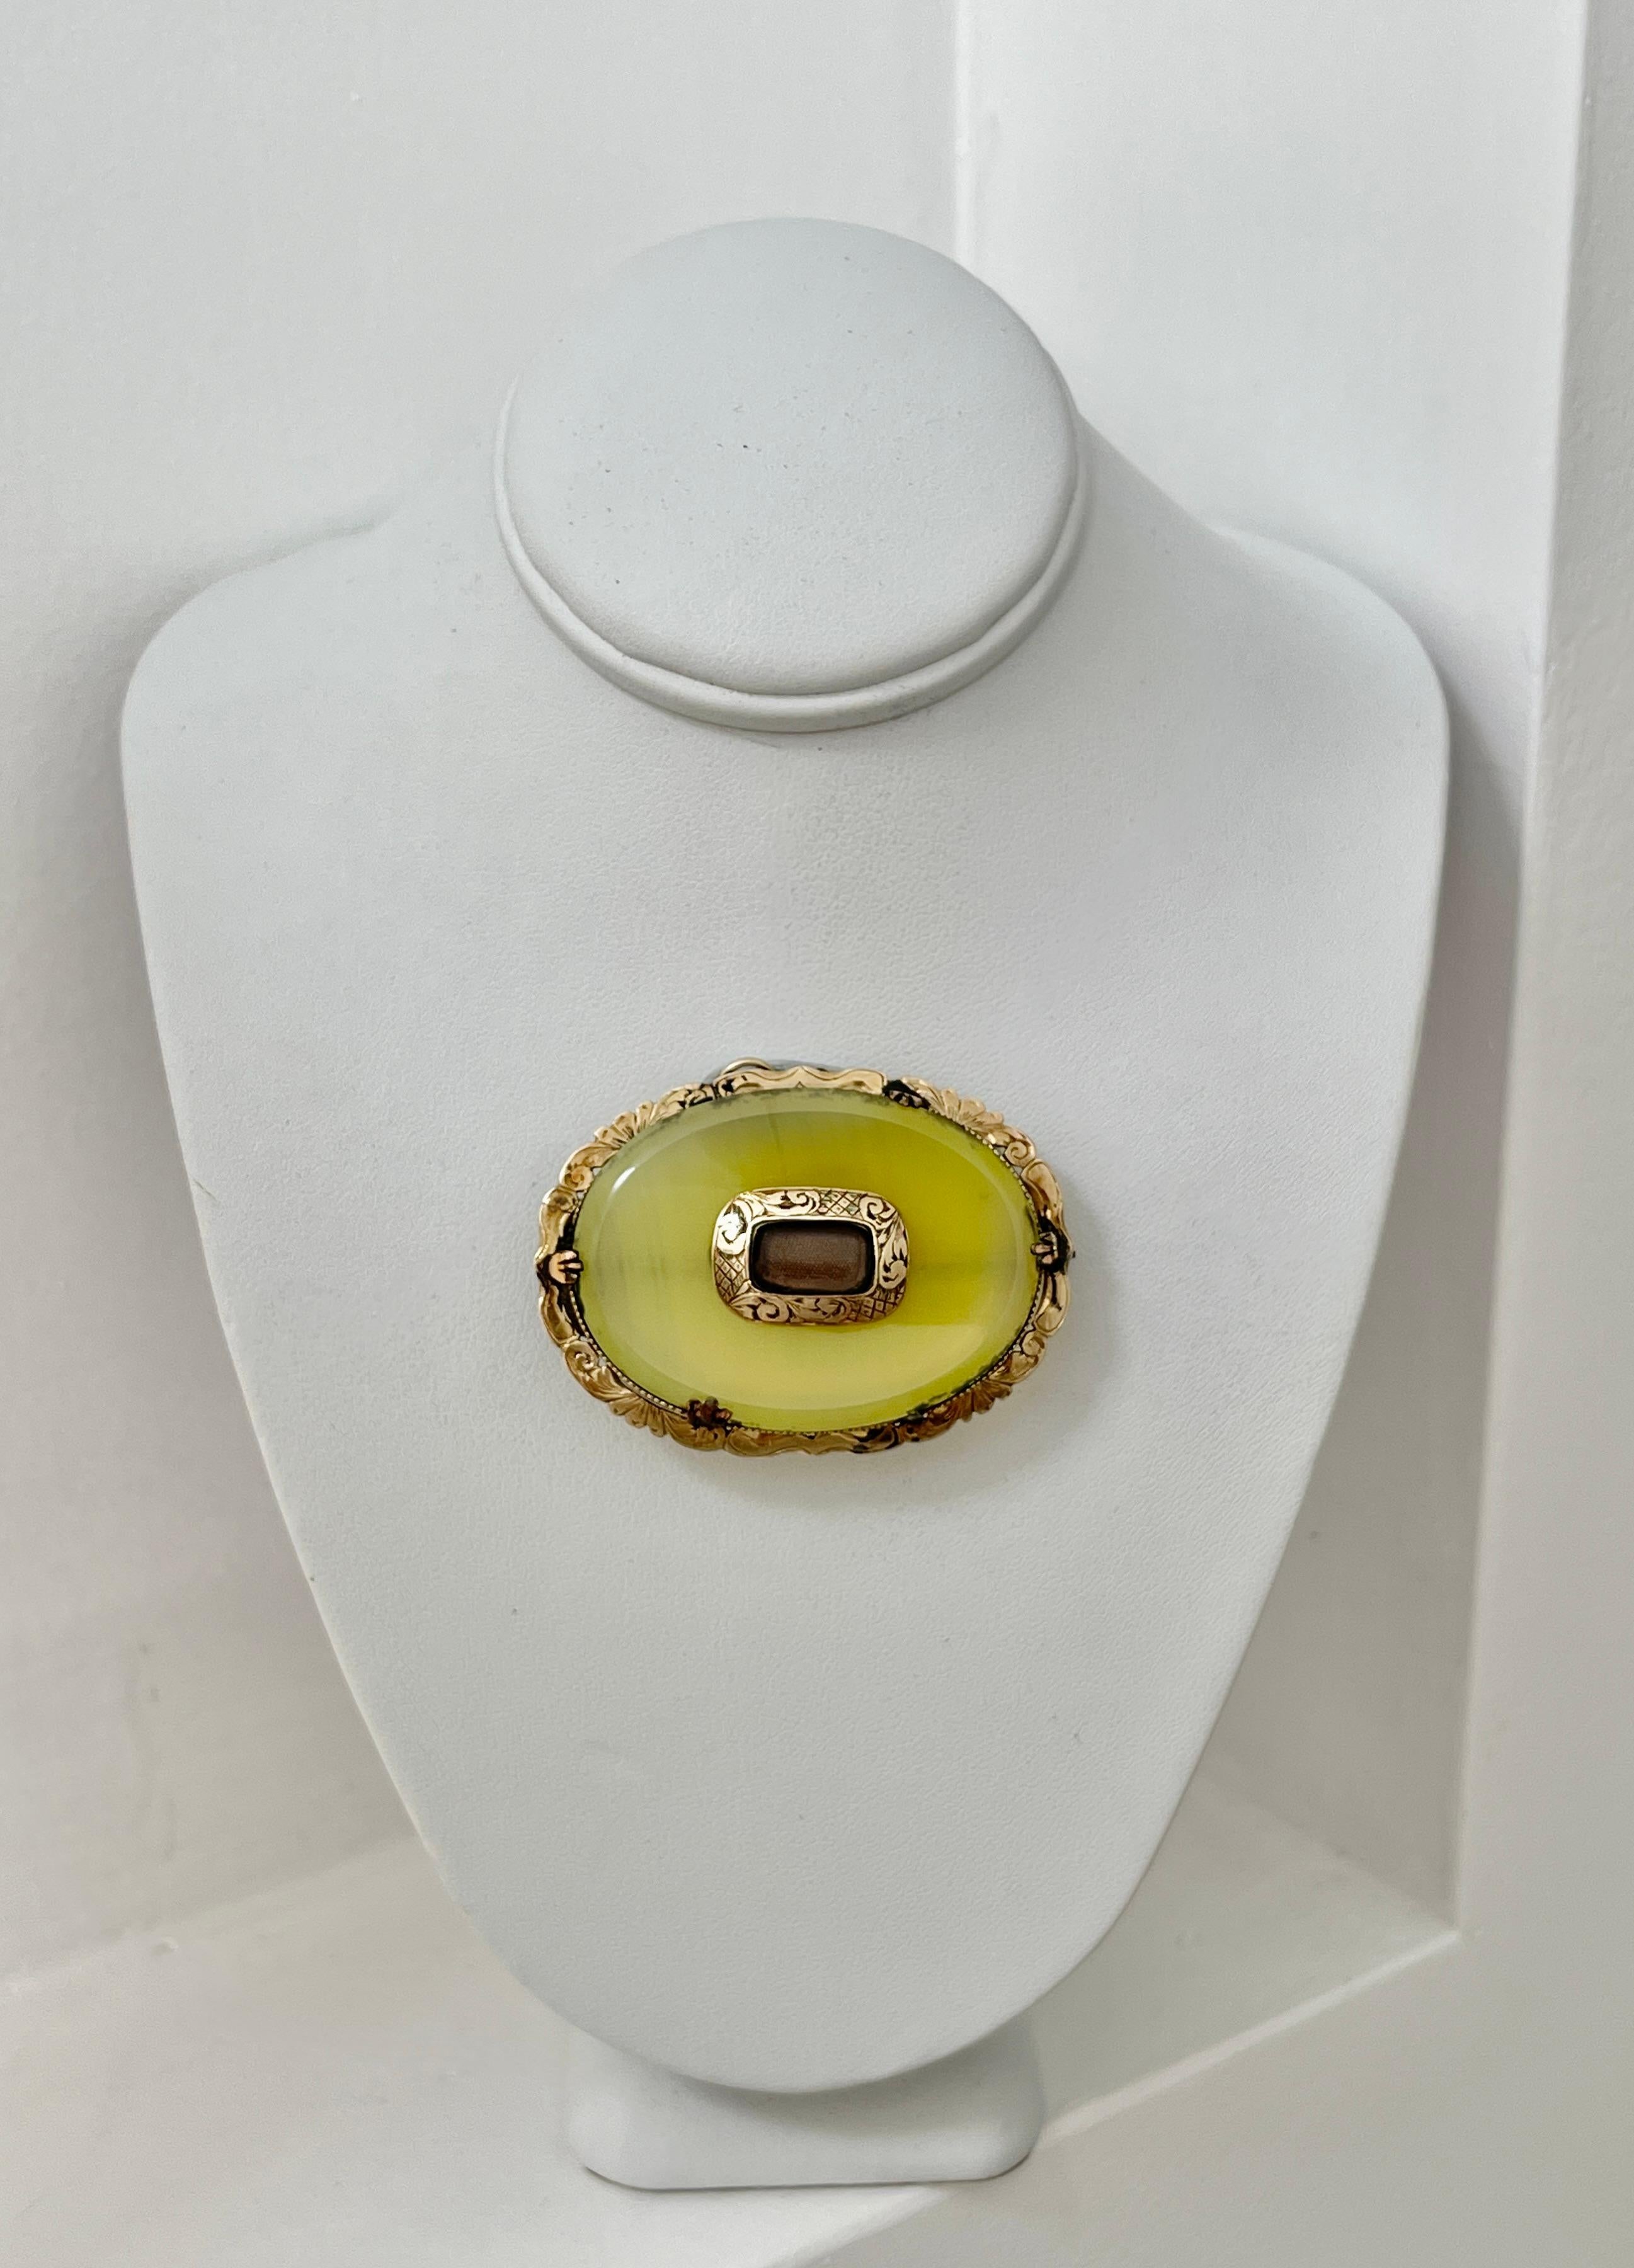 Antique Victorian Lemon Banded Agate Mourning Brooch Pendant Hair Work c1890s In Fair Condition For Sale In Mona Vale, NSW